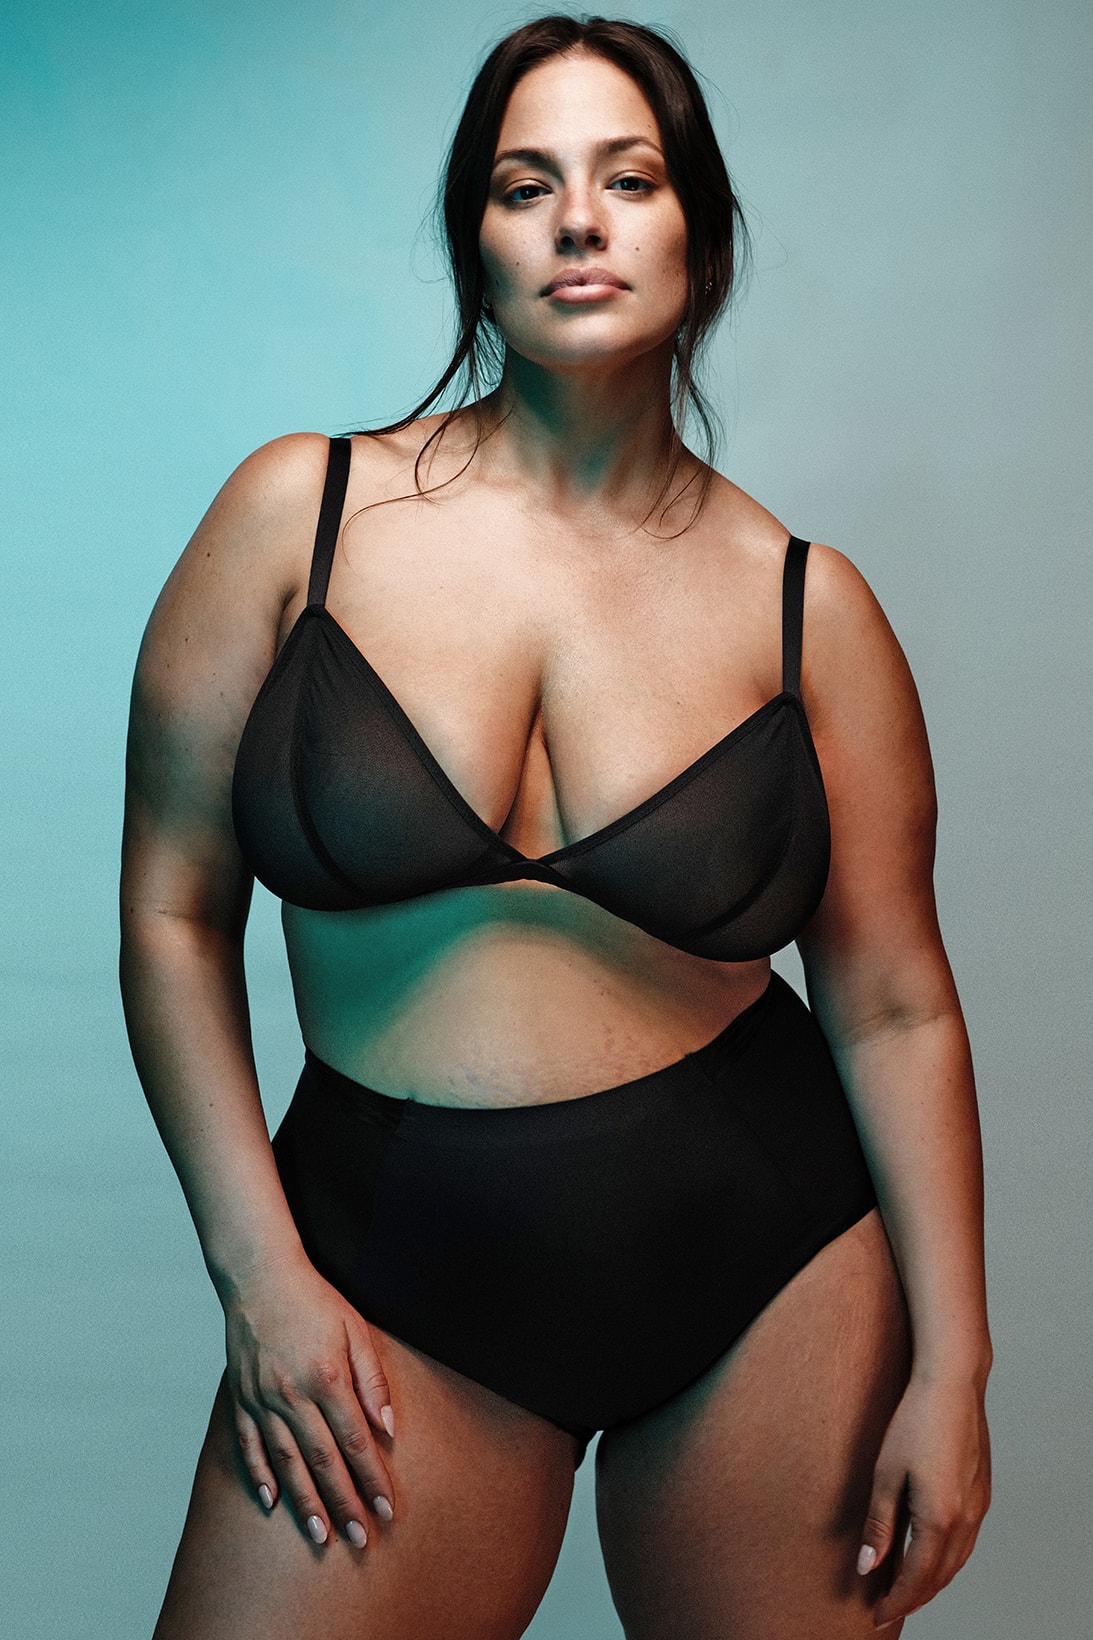 Ashley Graham wears black underwear and gold bust in new photo